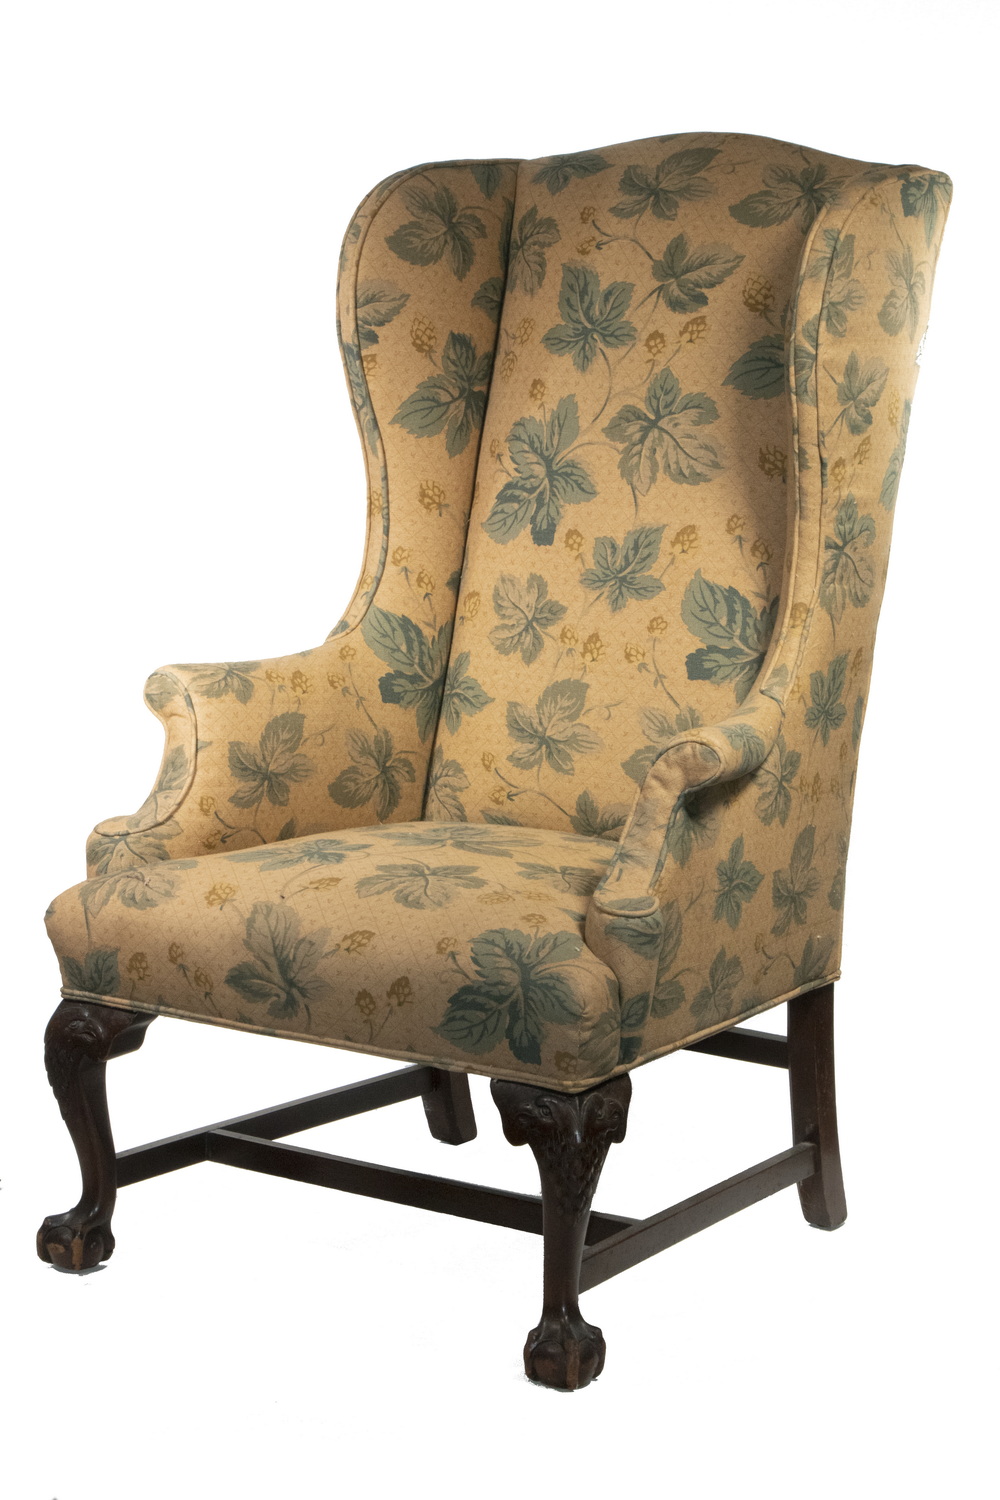 CUSTOM MAHOGANY WING CHAIR Chippendale